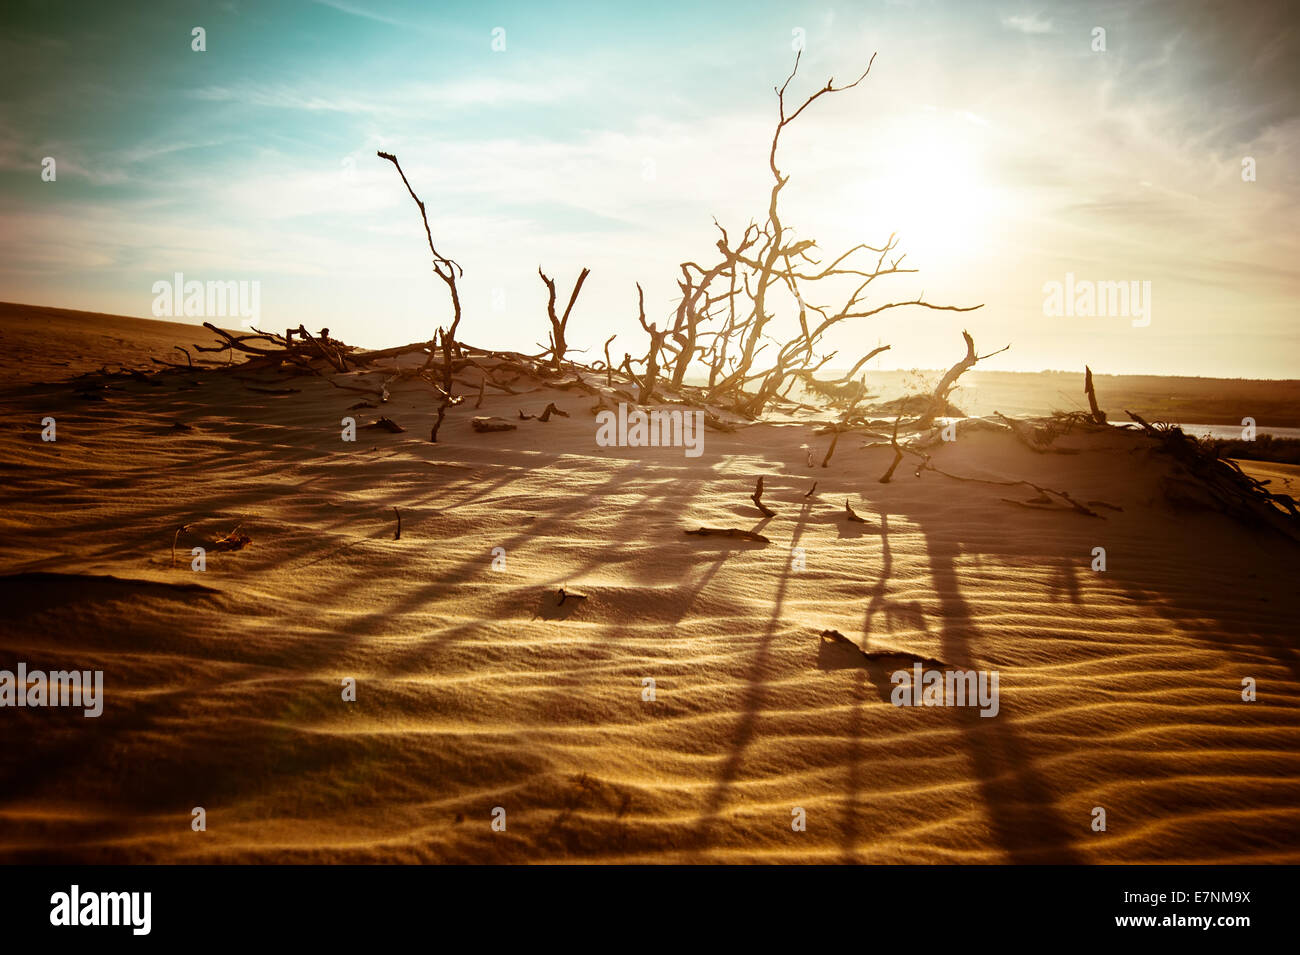 Desert landscape with dead plants in sand dunes under sunny sky. Global warming concept. Nature background Stock Photo